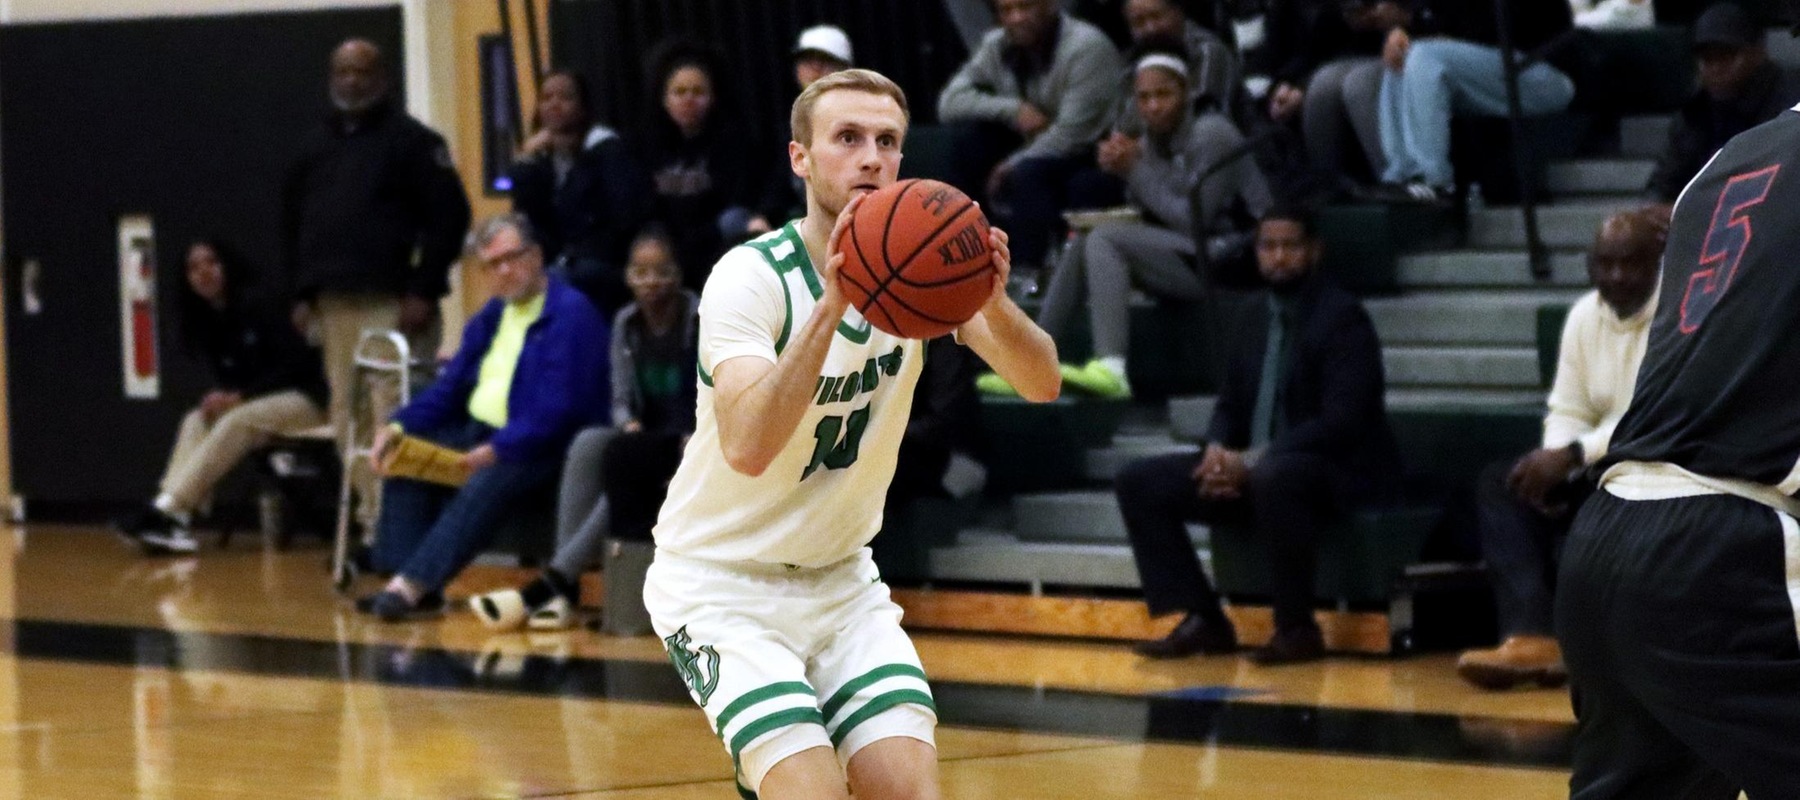 Caleb Matthews scored 17 points on 7-of-12 shooting against New Haven on Sunday. Copyright 2023; Wilmington University. All rights reserved. Photo by Dan Lauletta. February 15, 2023 vs. Queens.